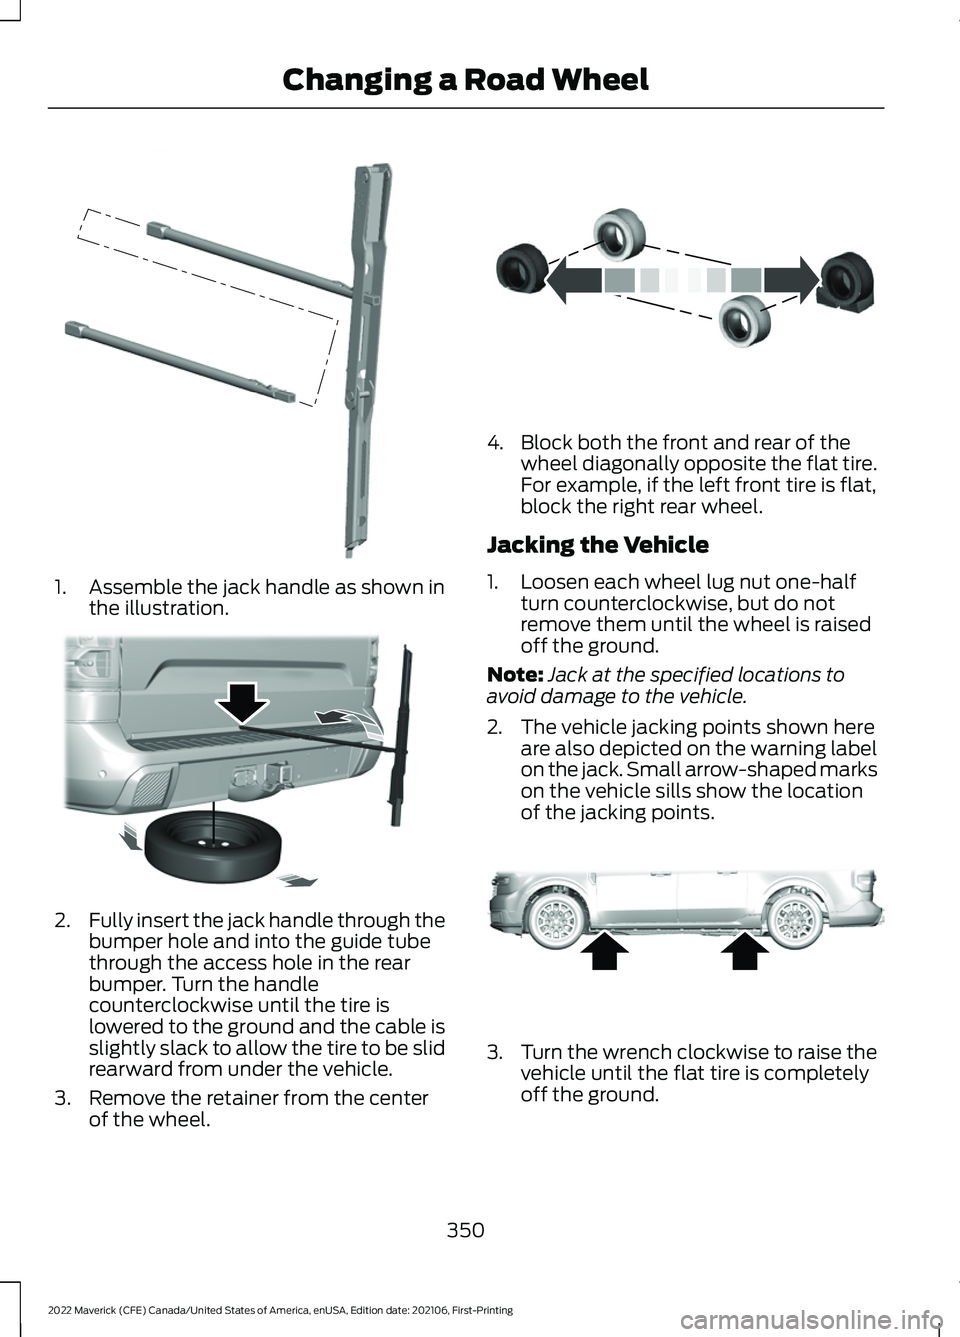 FORD MAVERICK 2022  Owners Manual 1. Assemble the jack handle as shown in
the illustration. 2.
Fully insert the jack handle through the
bumper hole and into the guide tube
through the access hole in the rear
bumper. Turn the handle
co